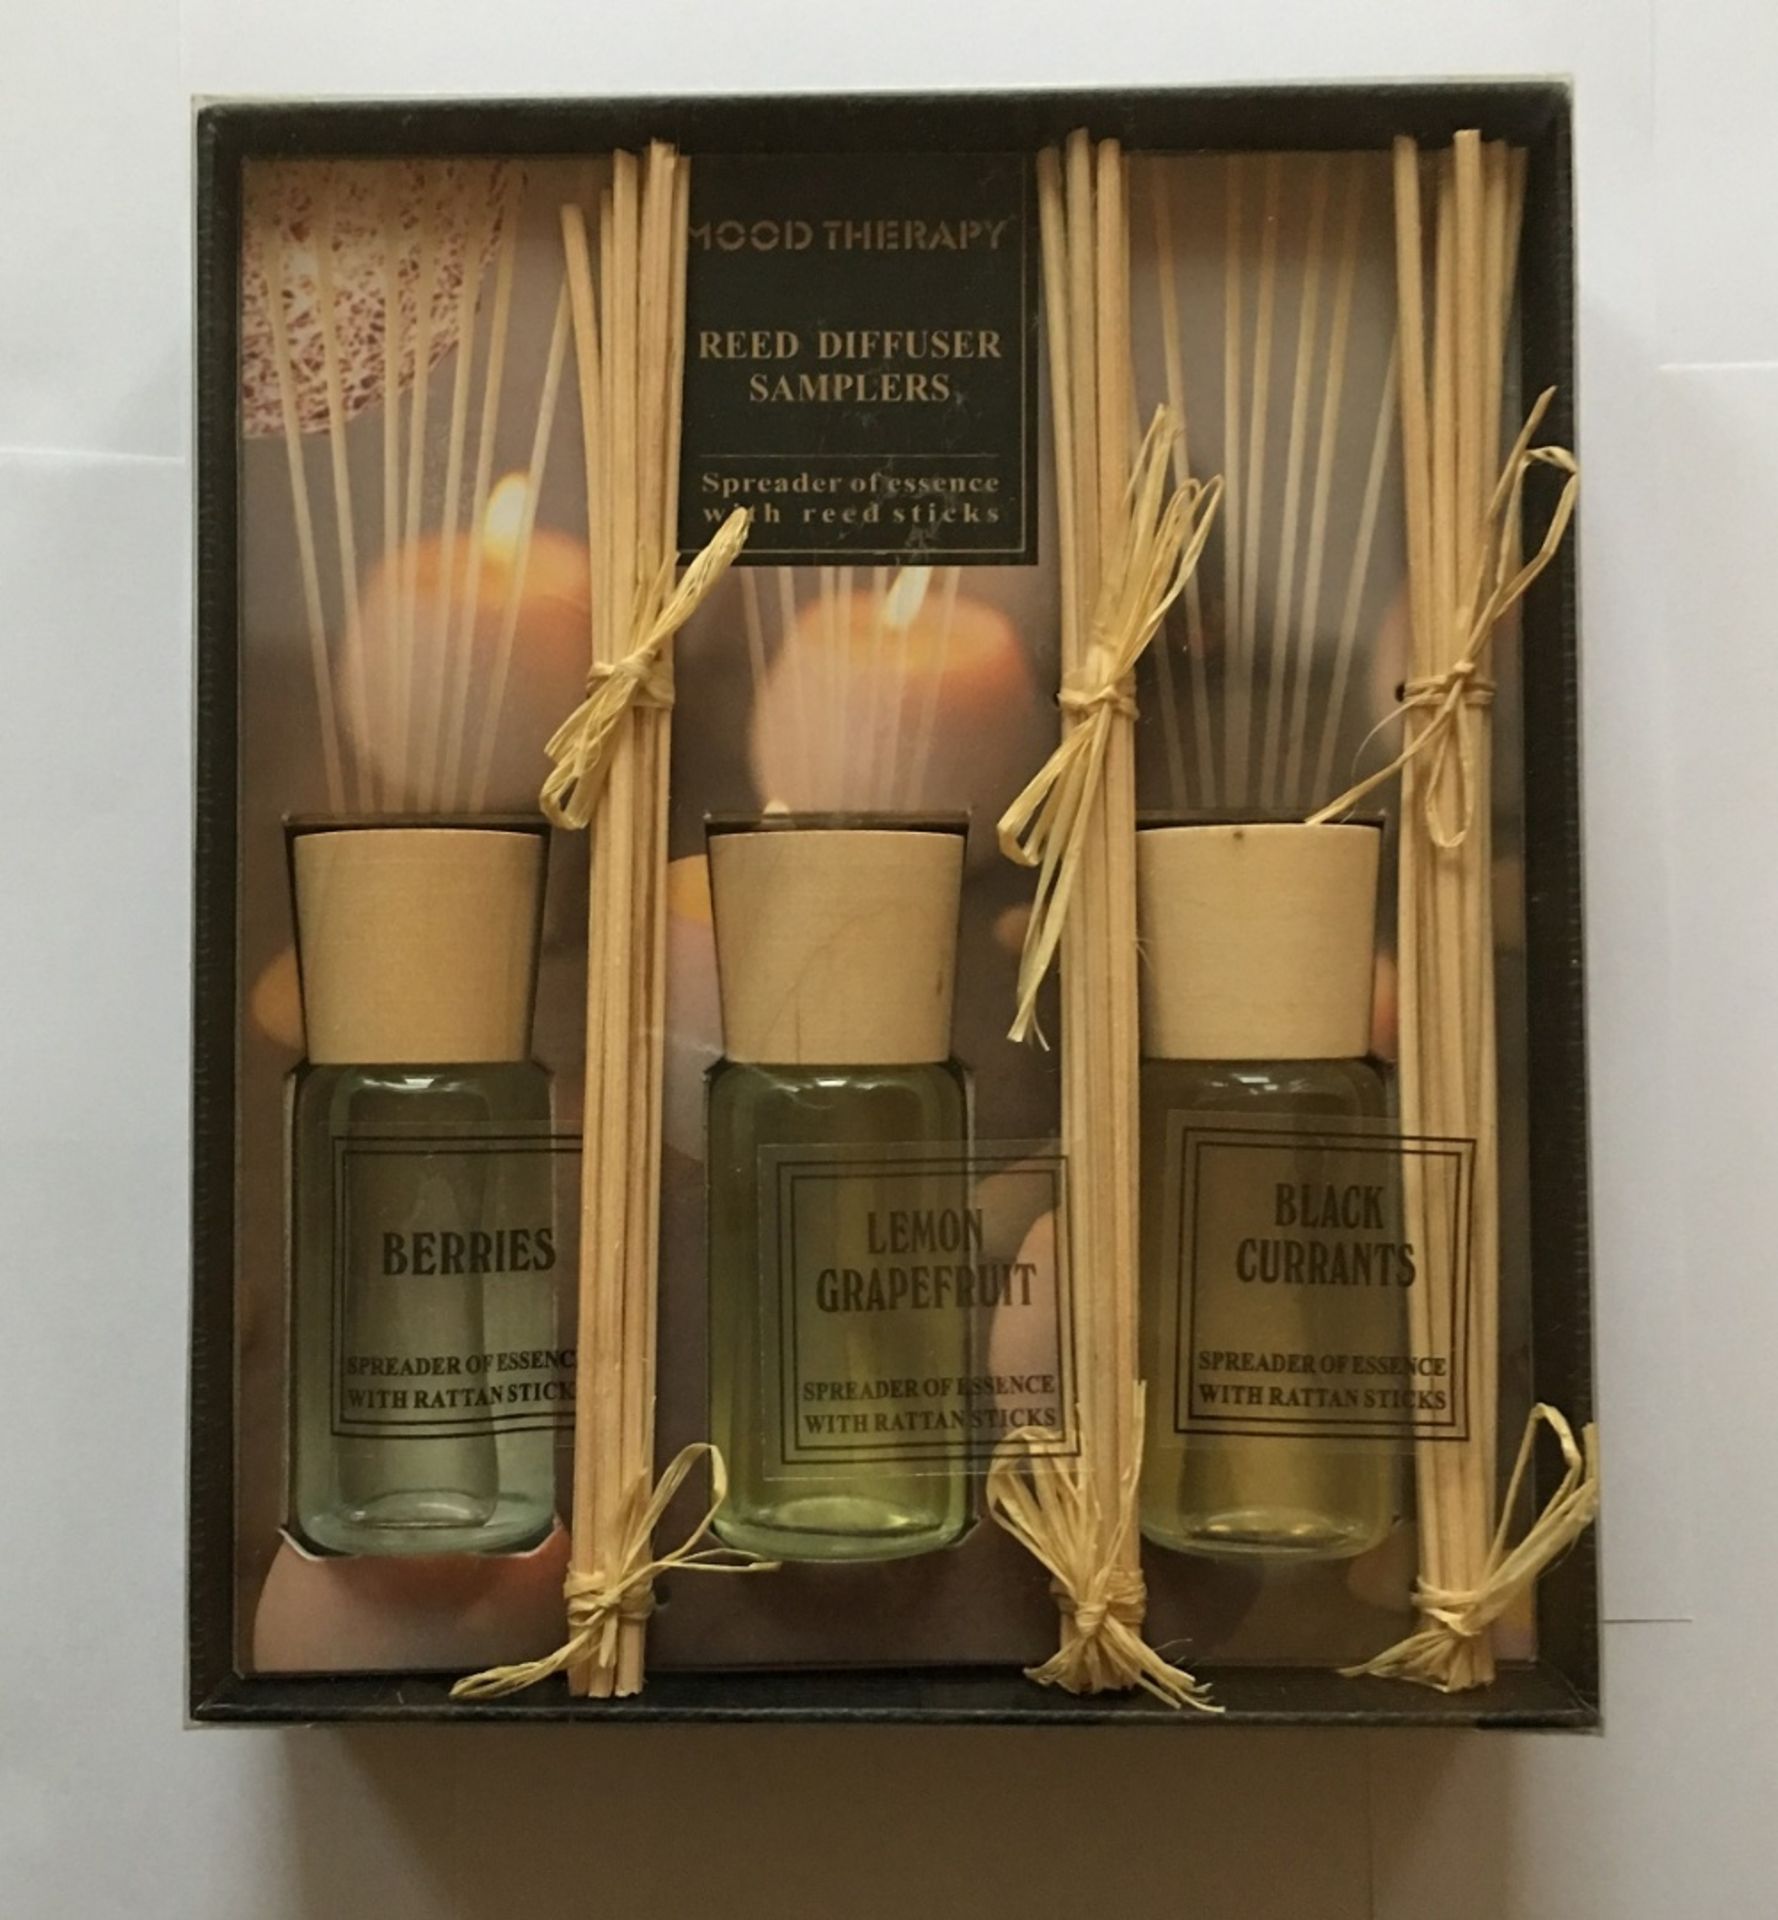 24 x Mood Therapy Reed Diffuser – Assorted Fragrances 90ml each – UK Delivery £20 – NO VAT